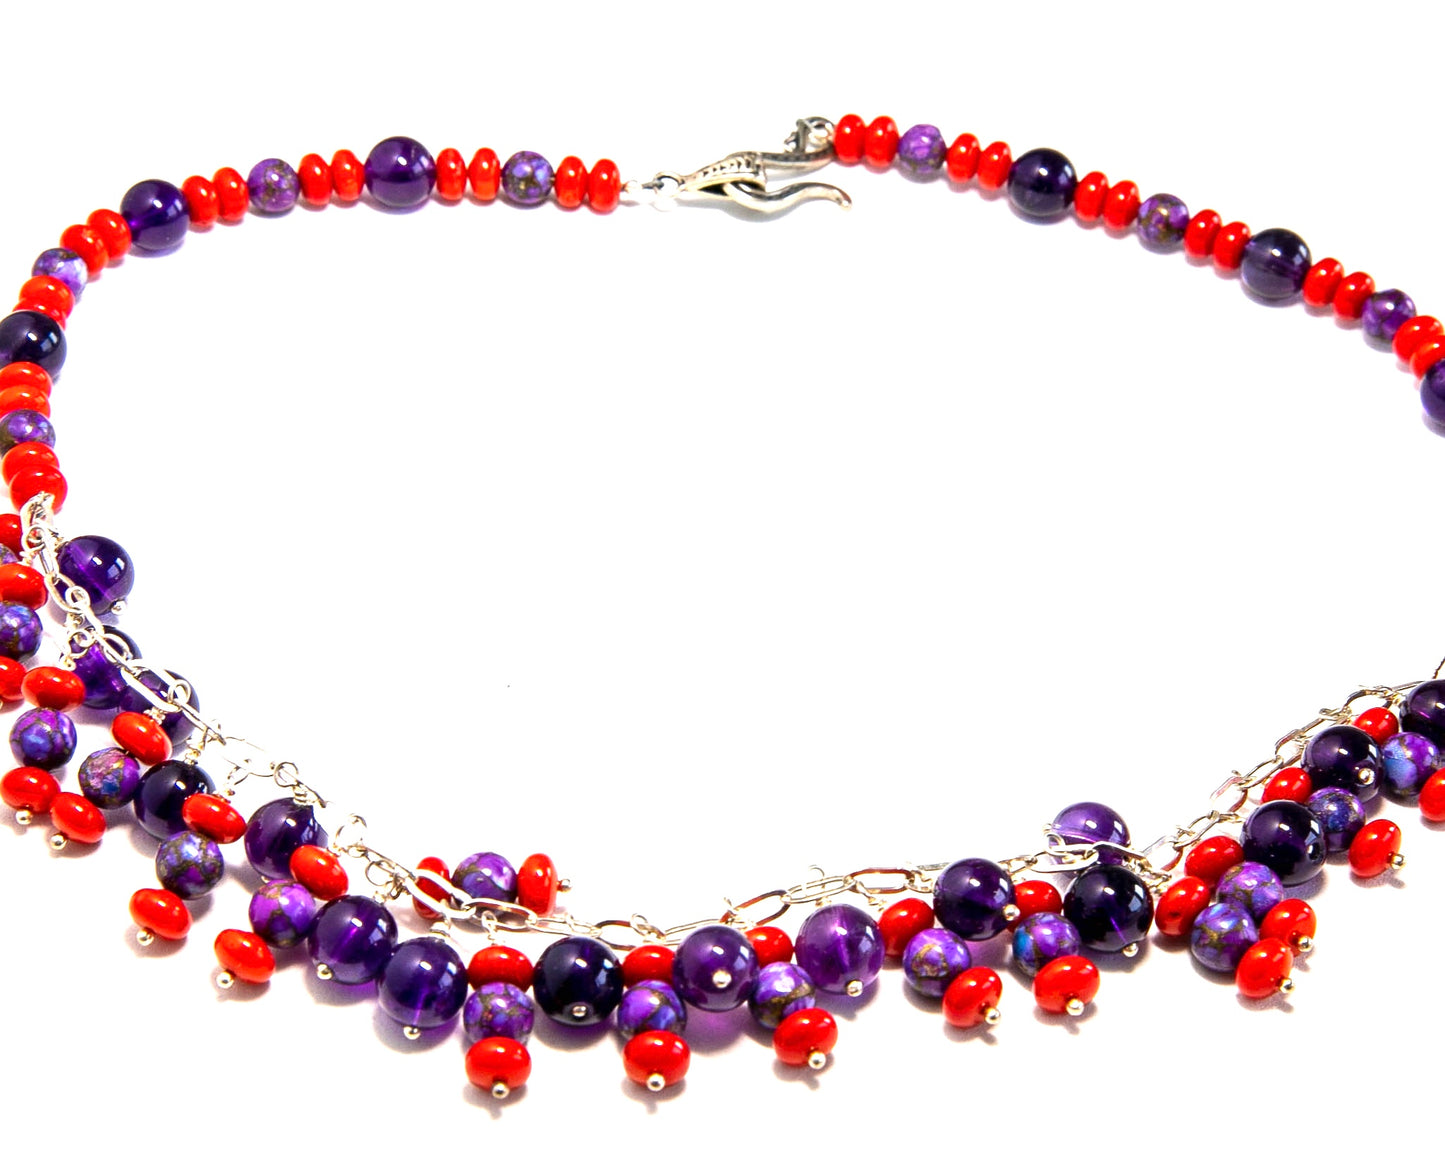 Vibrant and Charming Necklace